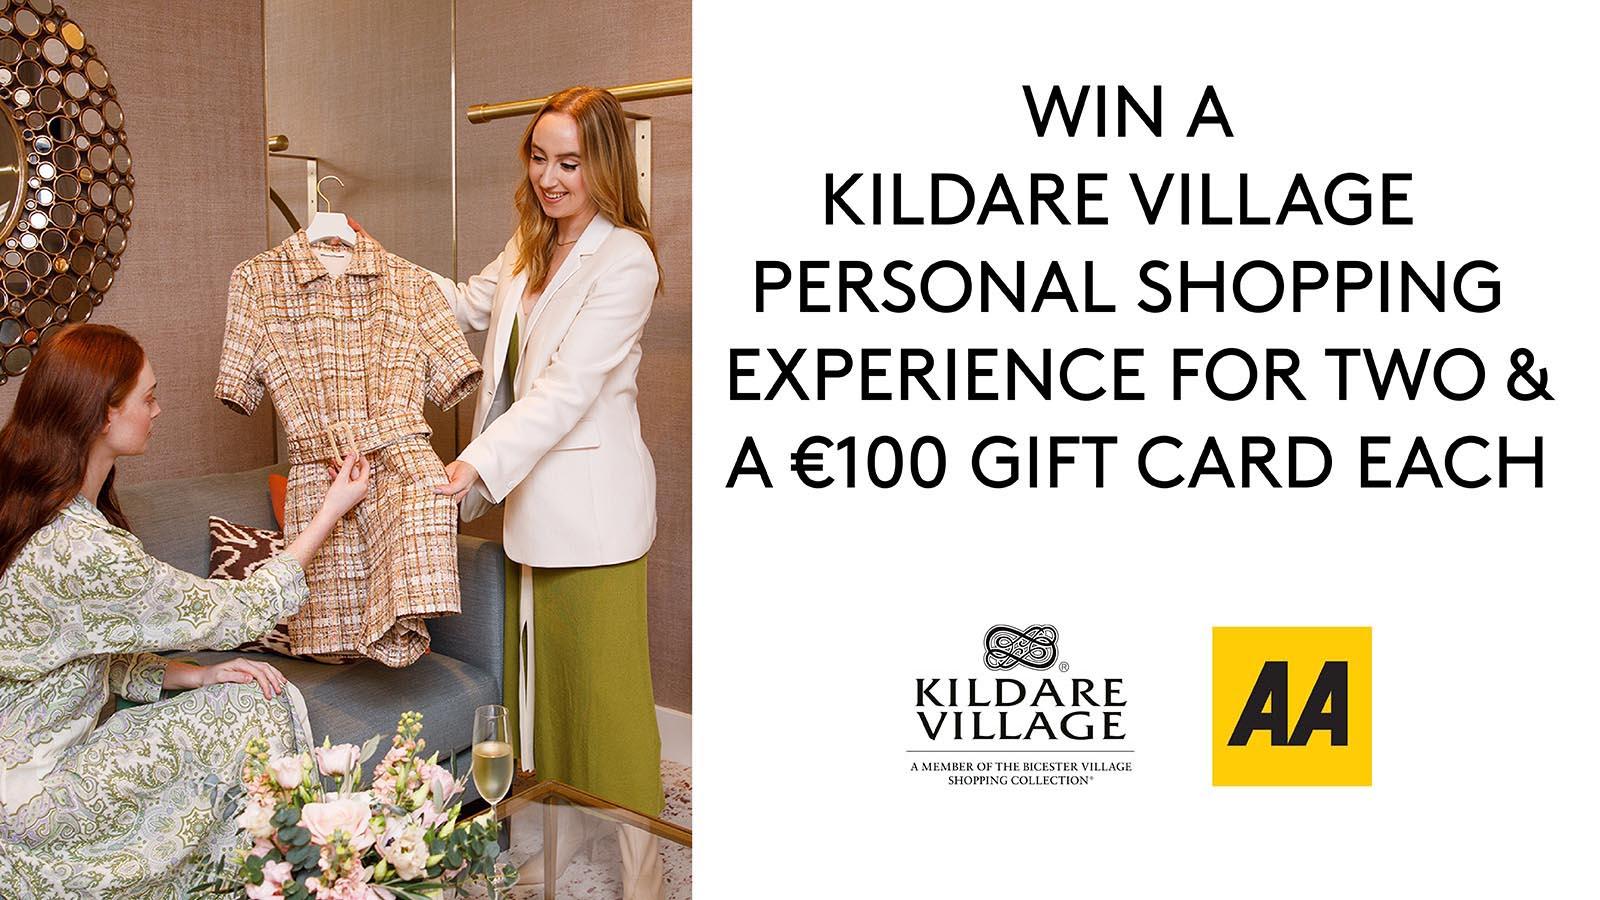 Win a personal shopping experience for 2, with a €100 gift card each